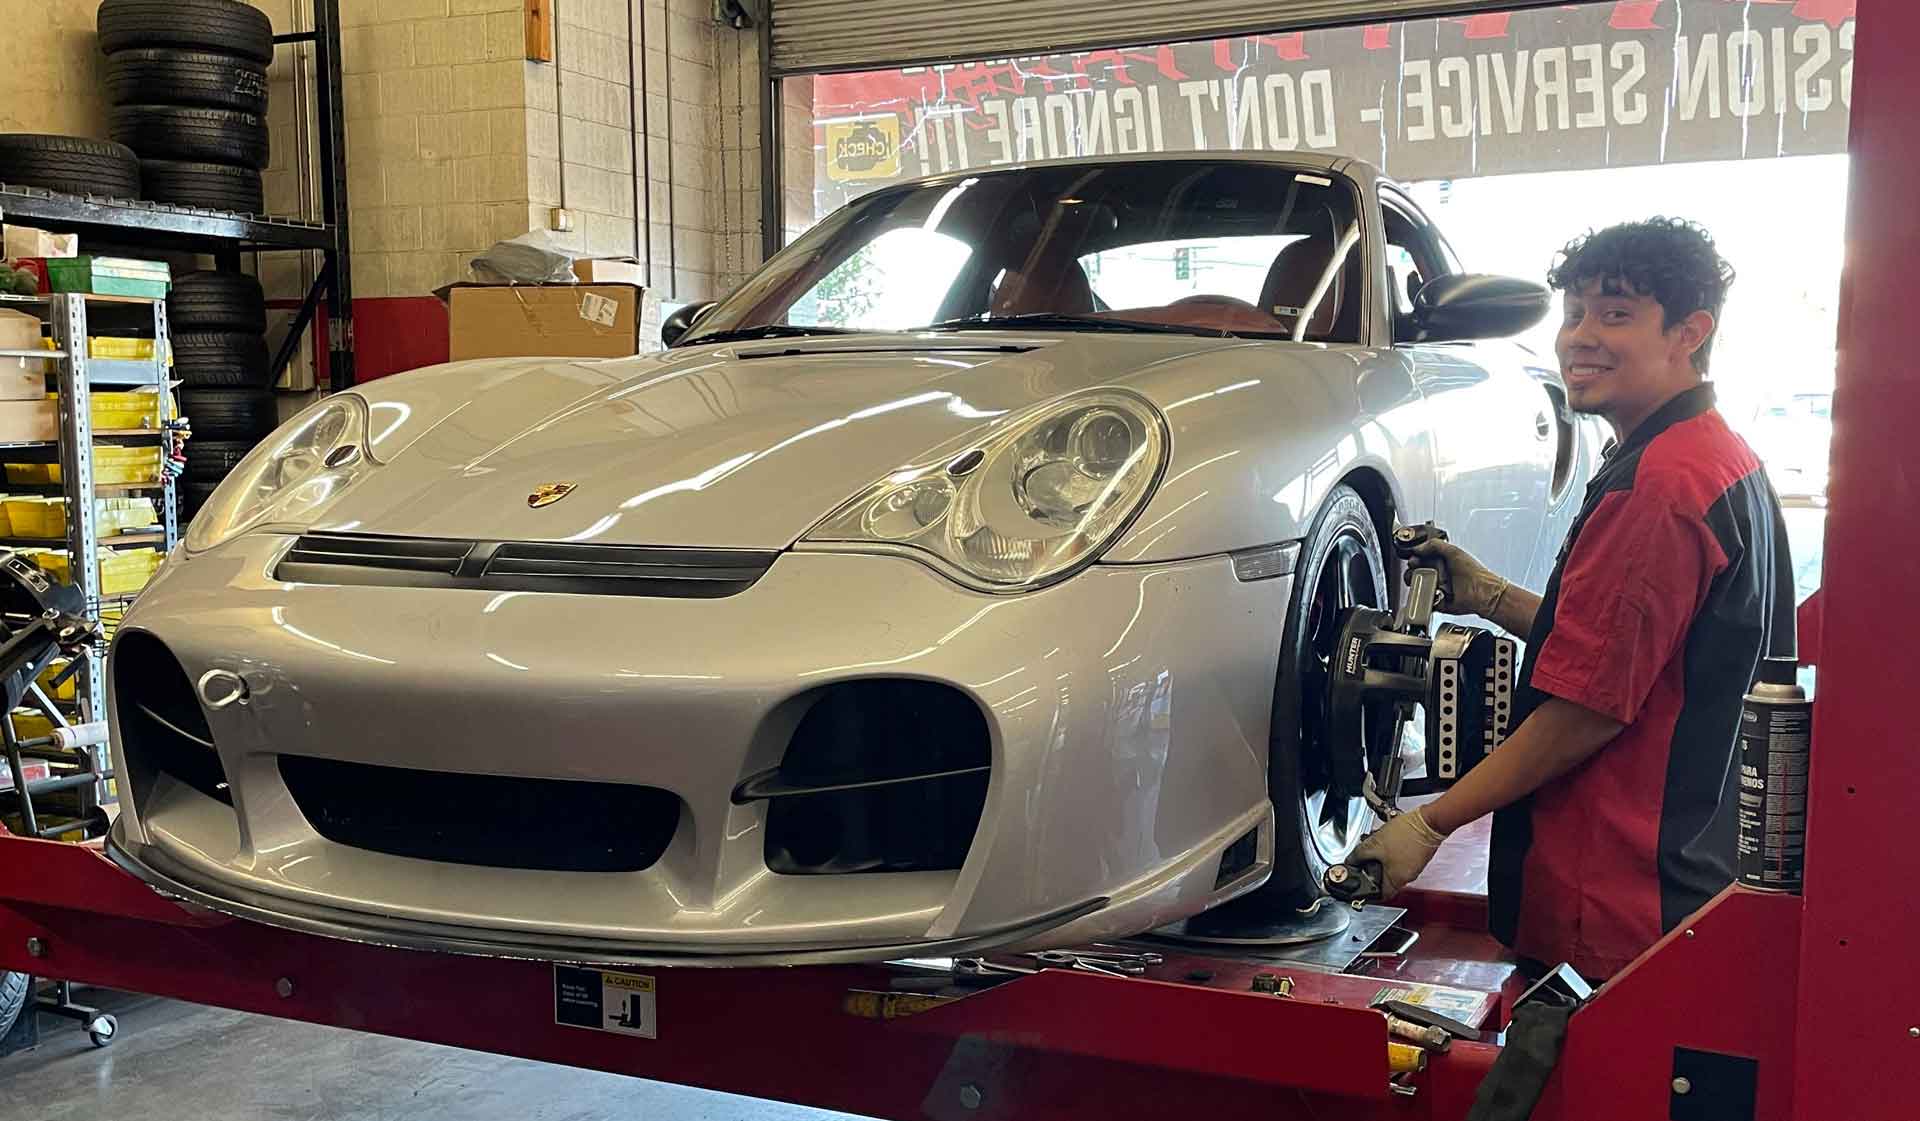 Certified Technician Performing A 4 Wheel Alignment